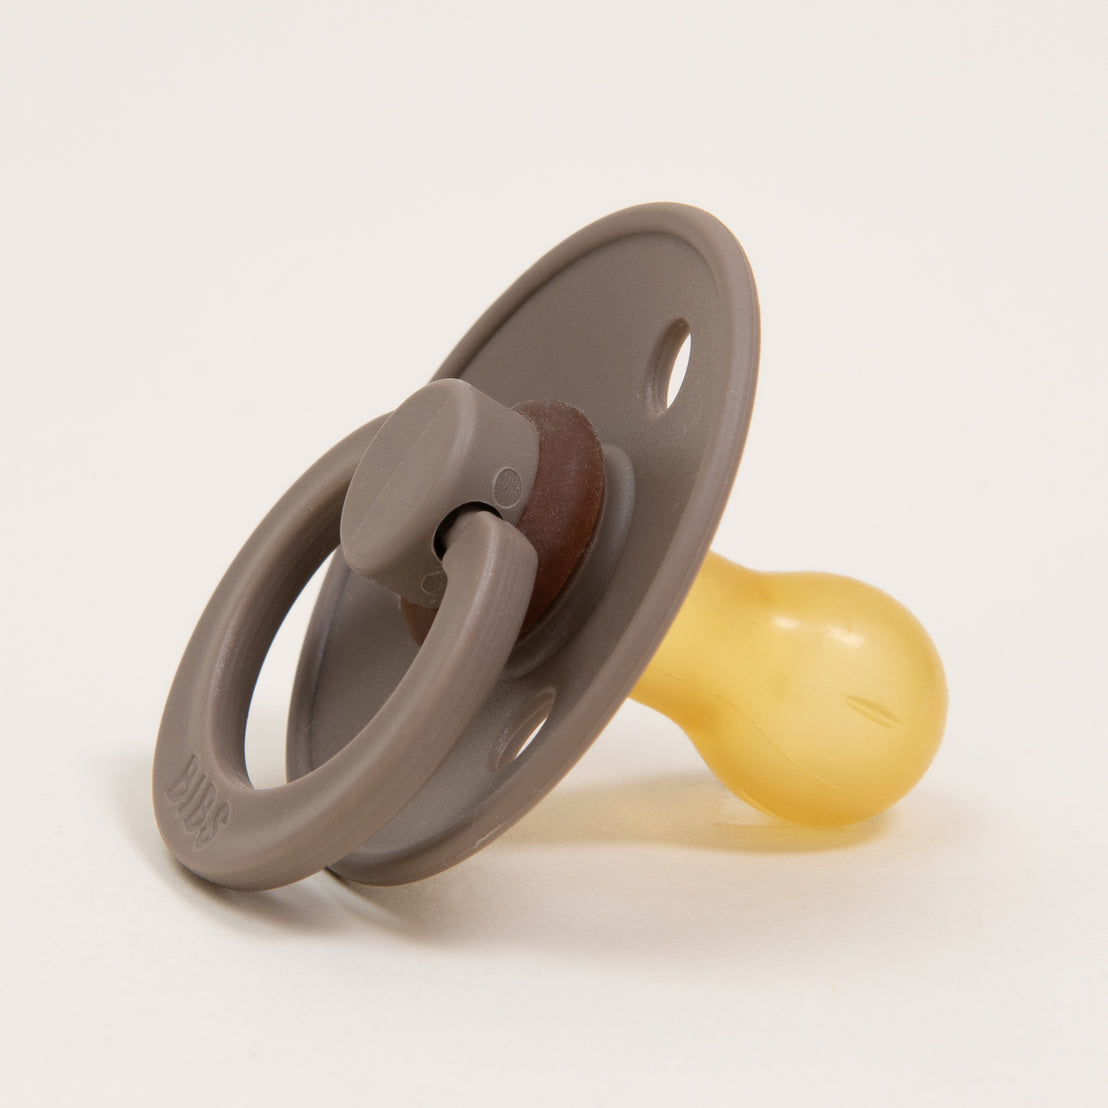 A dark oak Bibs pacifier with a natural rubber nipple and a handle, isolated on a light background.